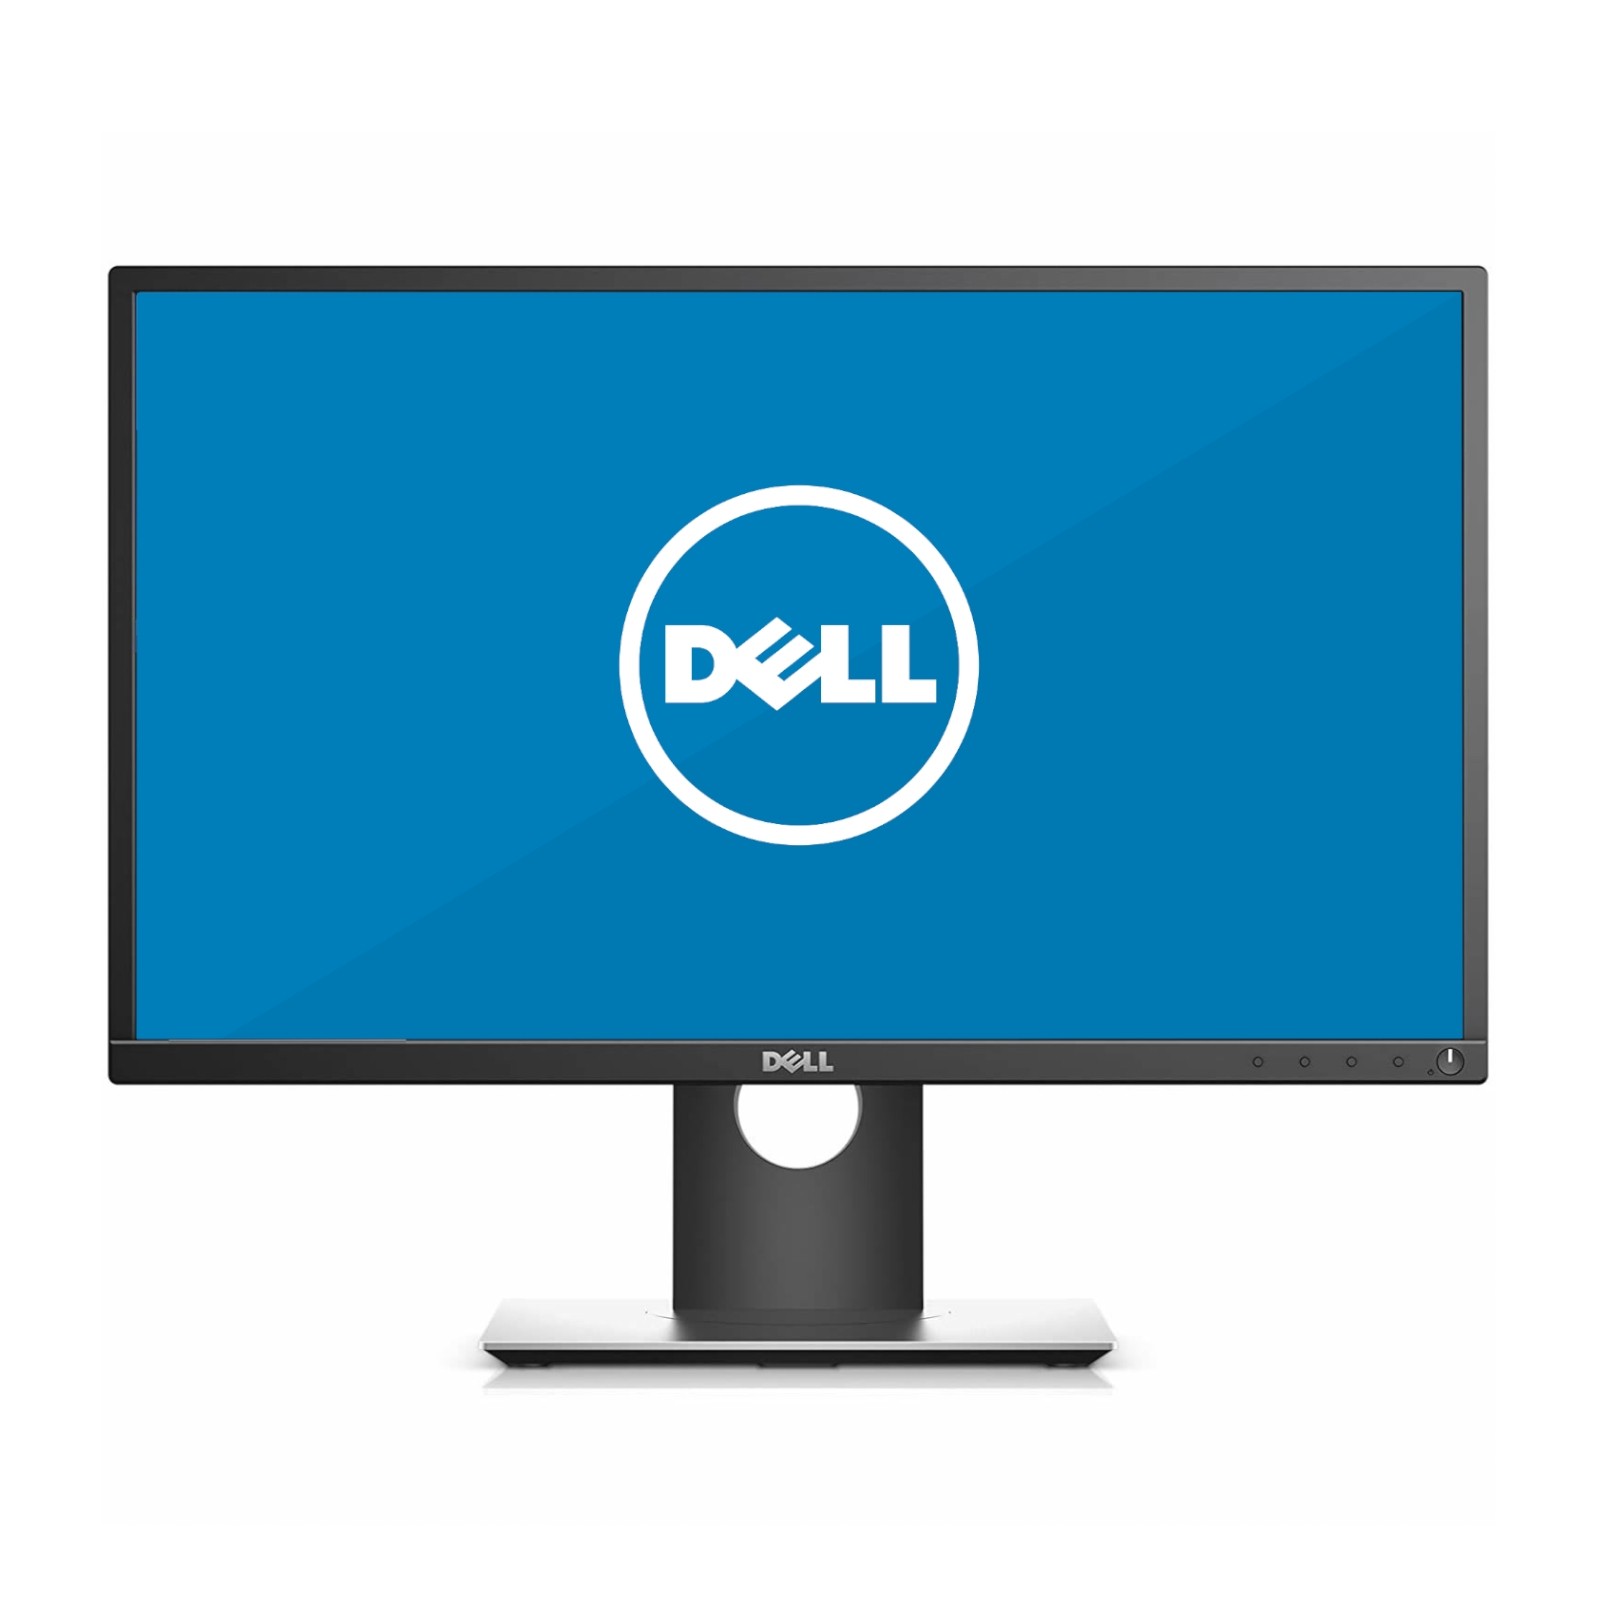 Dell P2317H 23" FHD (1920x1080) IPS LED Monitor Front